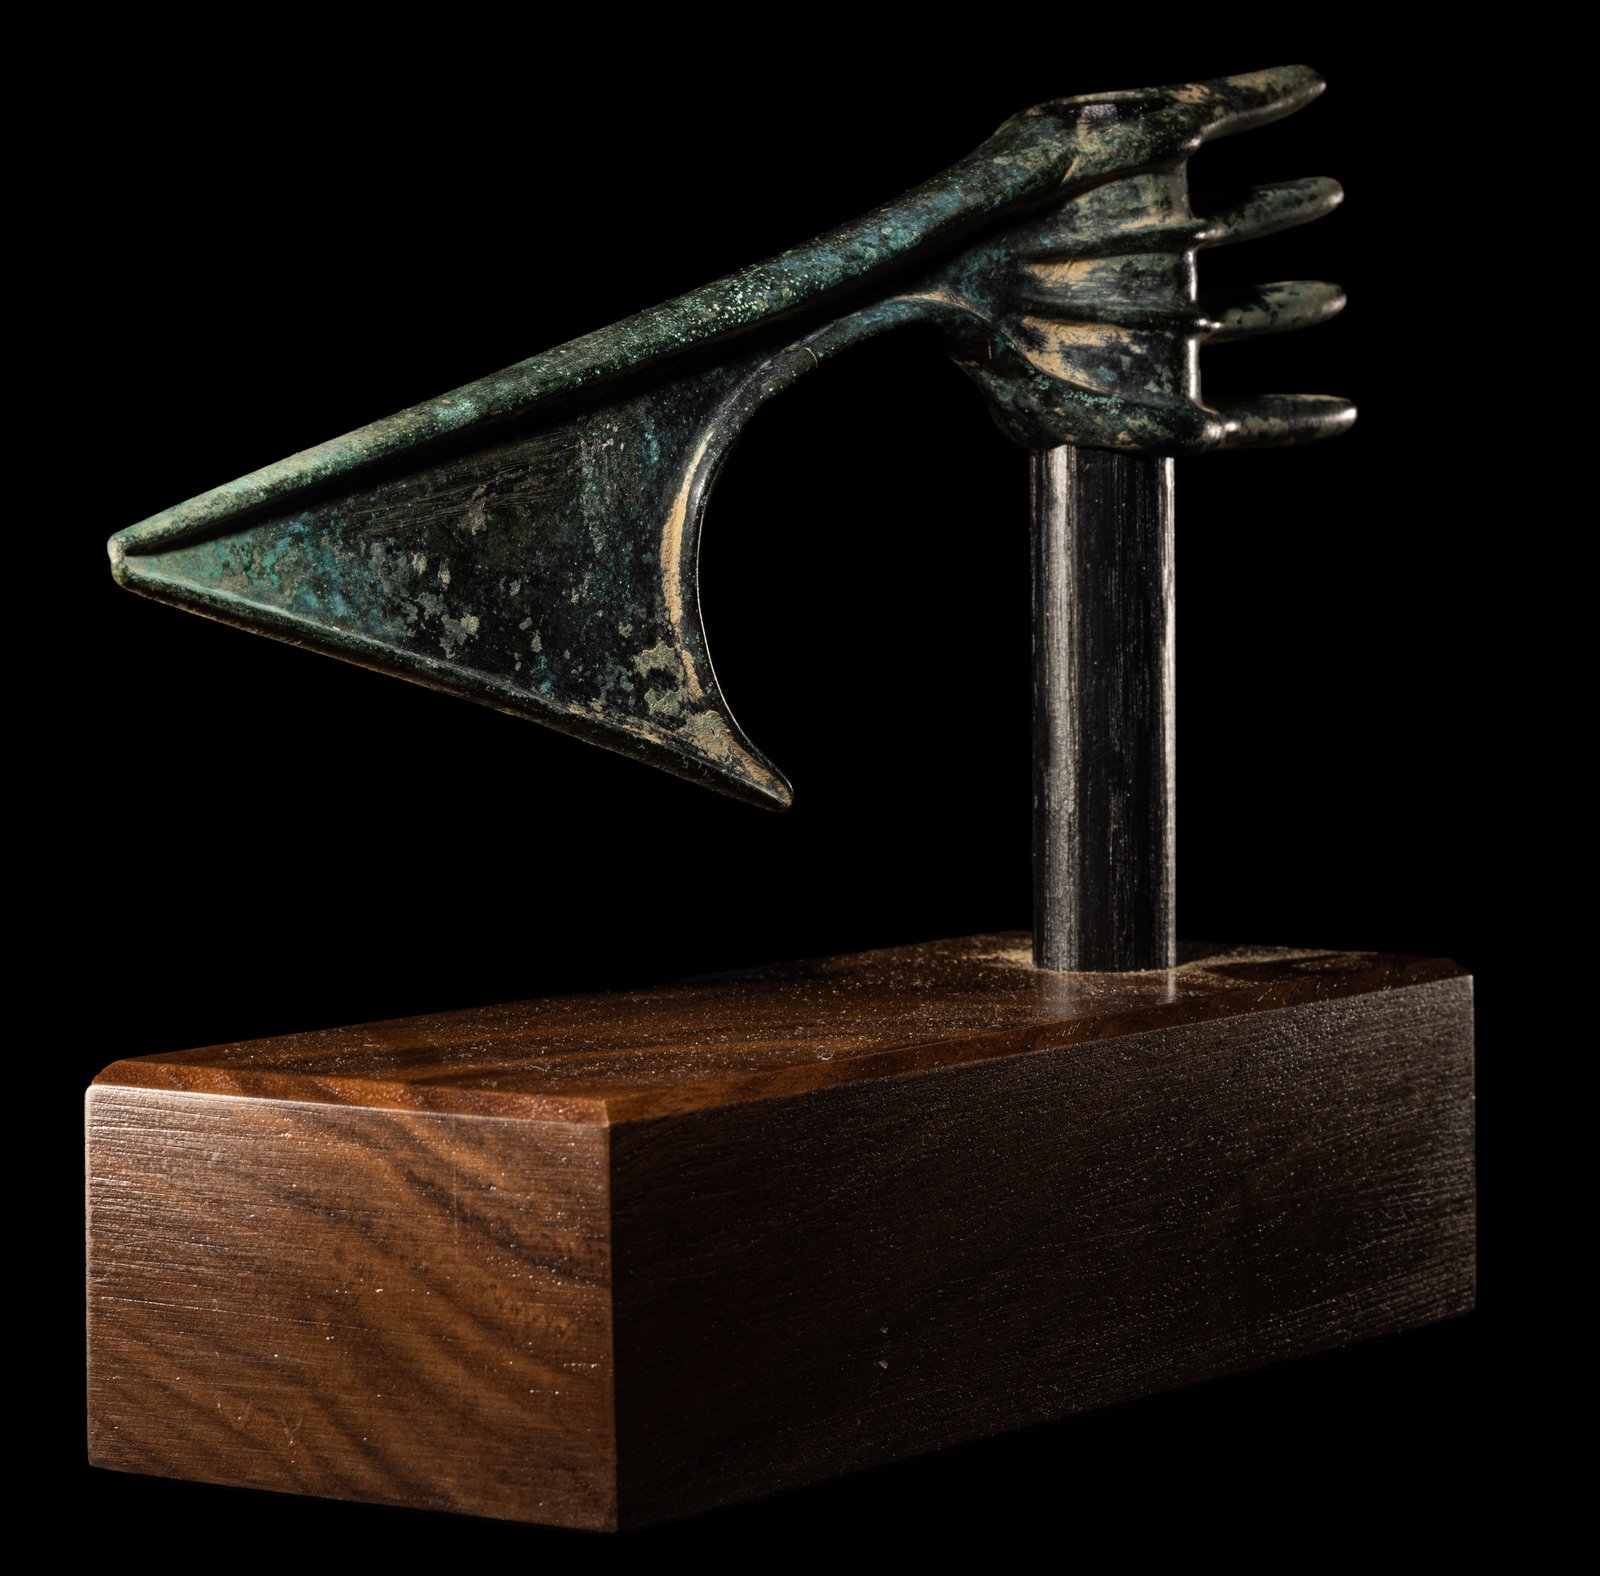 A Luristan Bronze Axehead Length 9 1/8 inches (23.2 cm). - Image 4 of 4